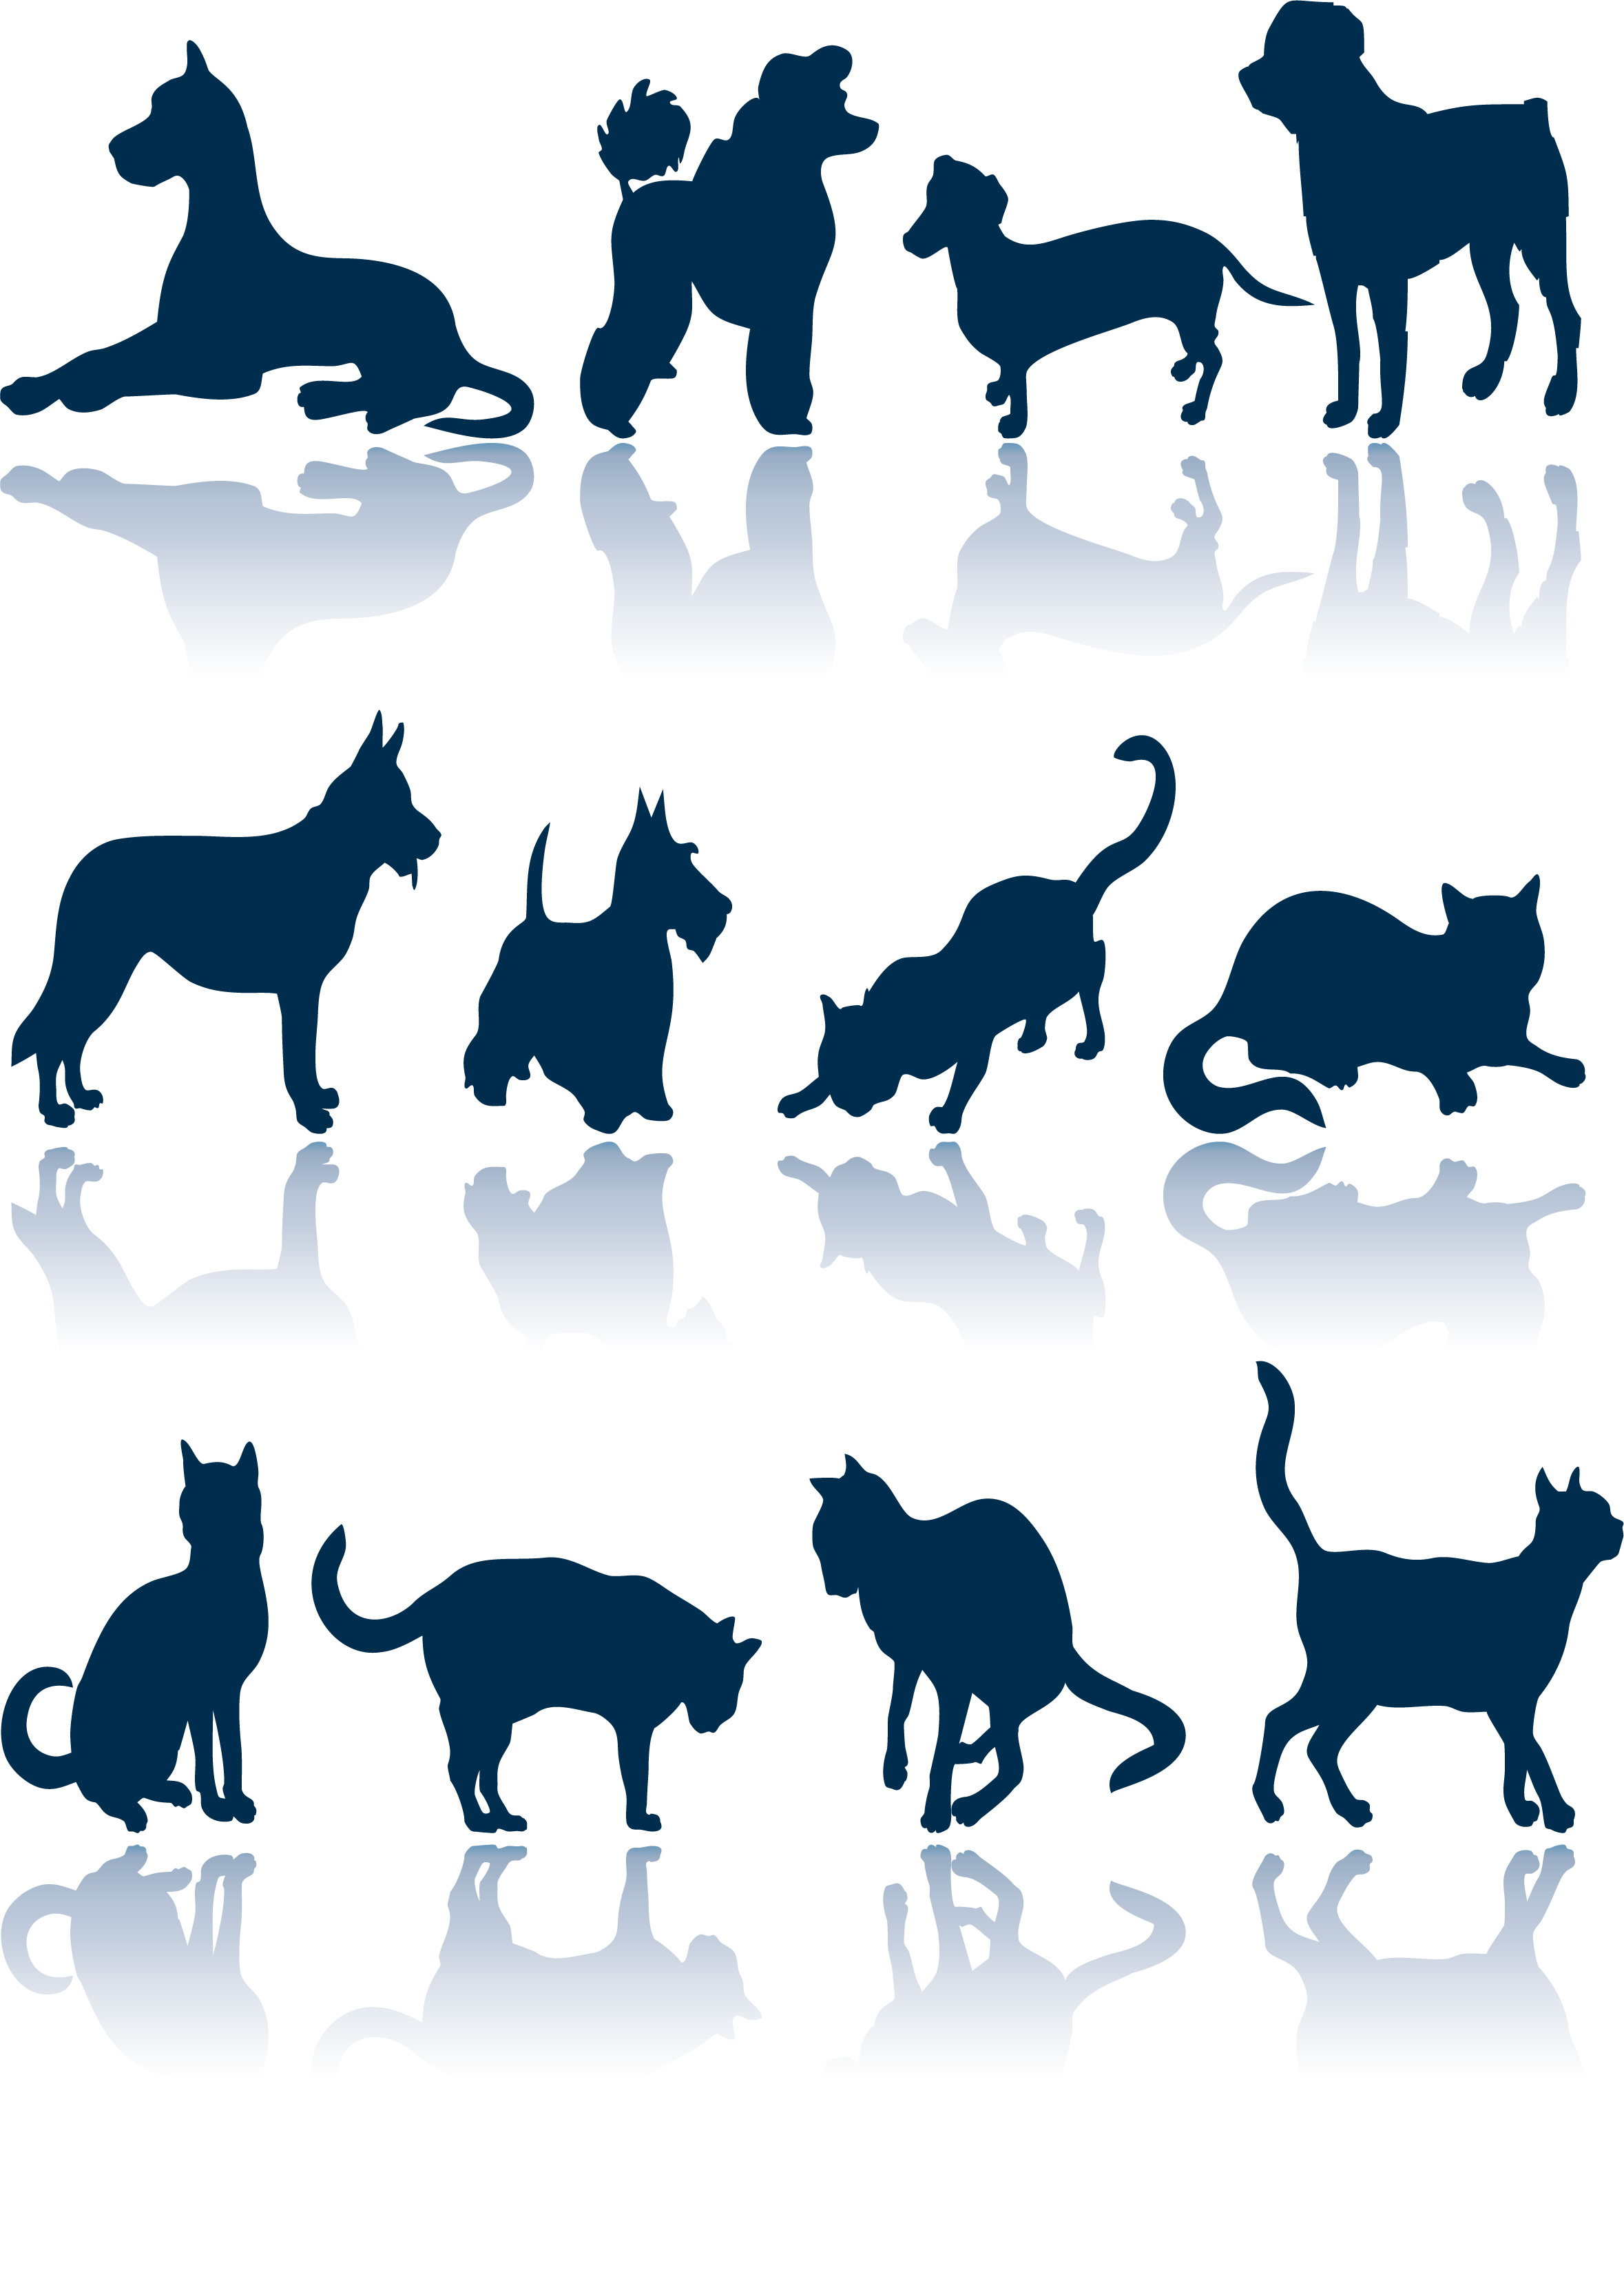 Silhouette Dog And Cat Png : Find & download free graphic resources for ...